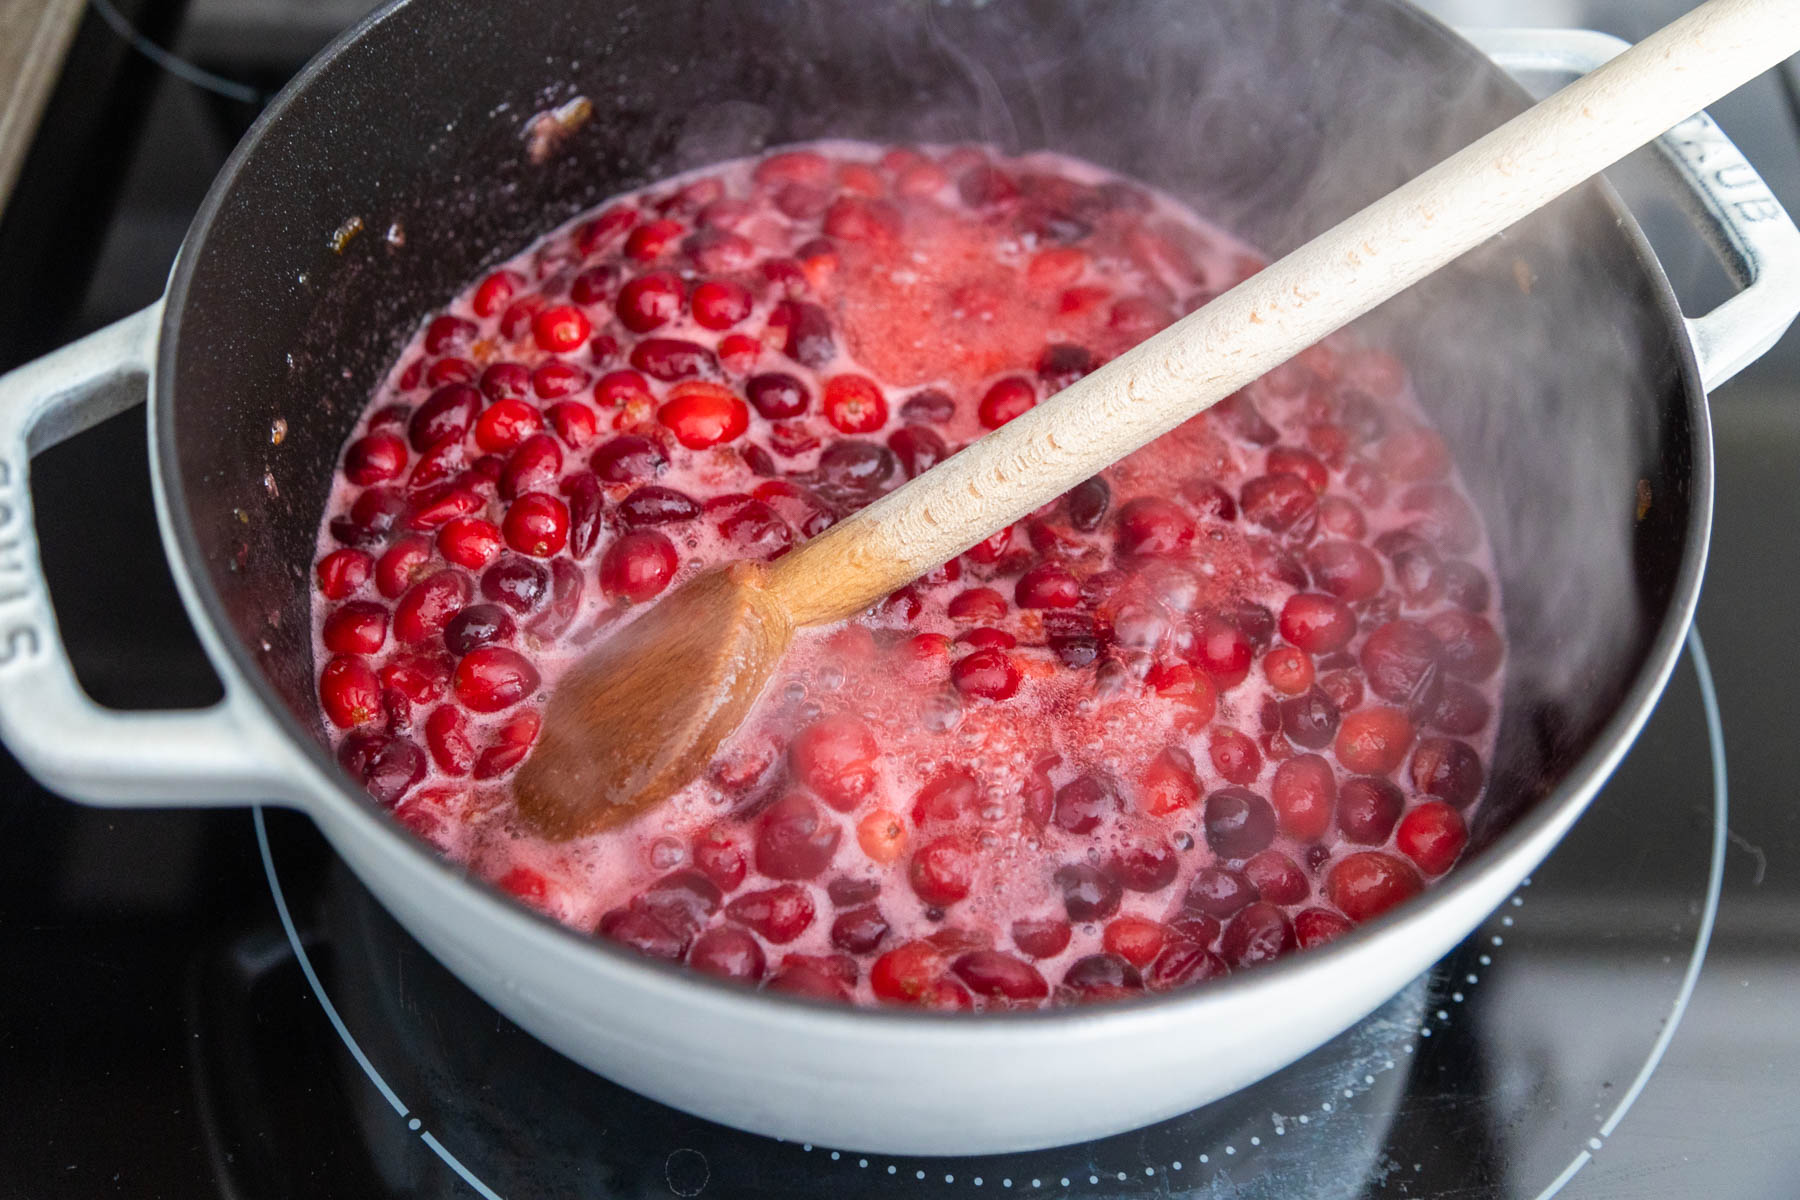 The cranberries are in a sauce pan bubbling. A wooden spoon is stirring them. 